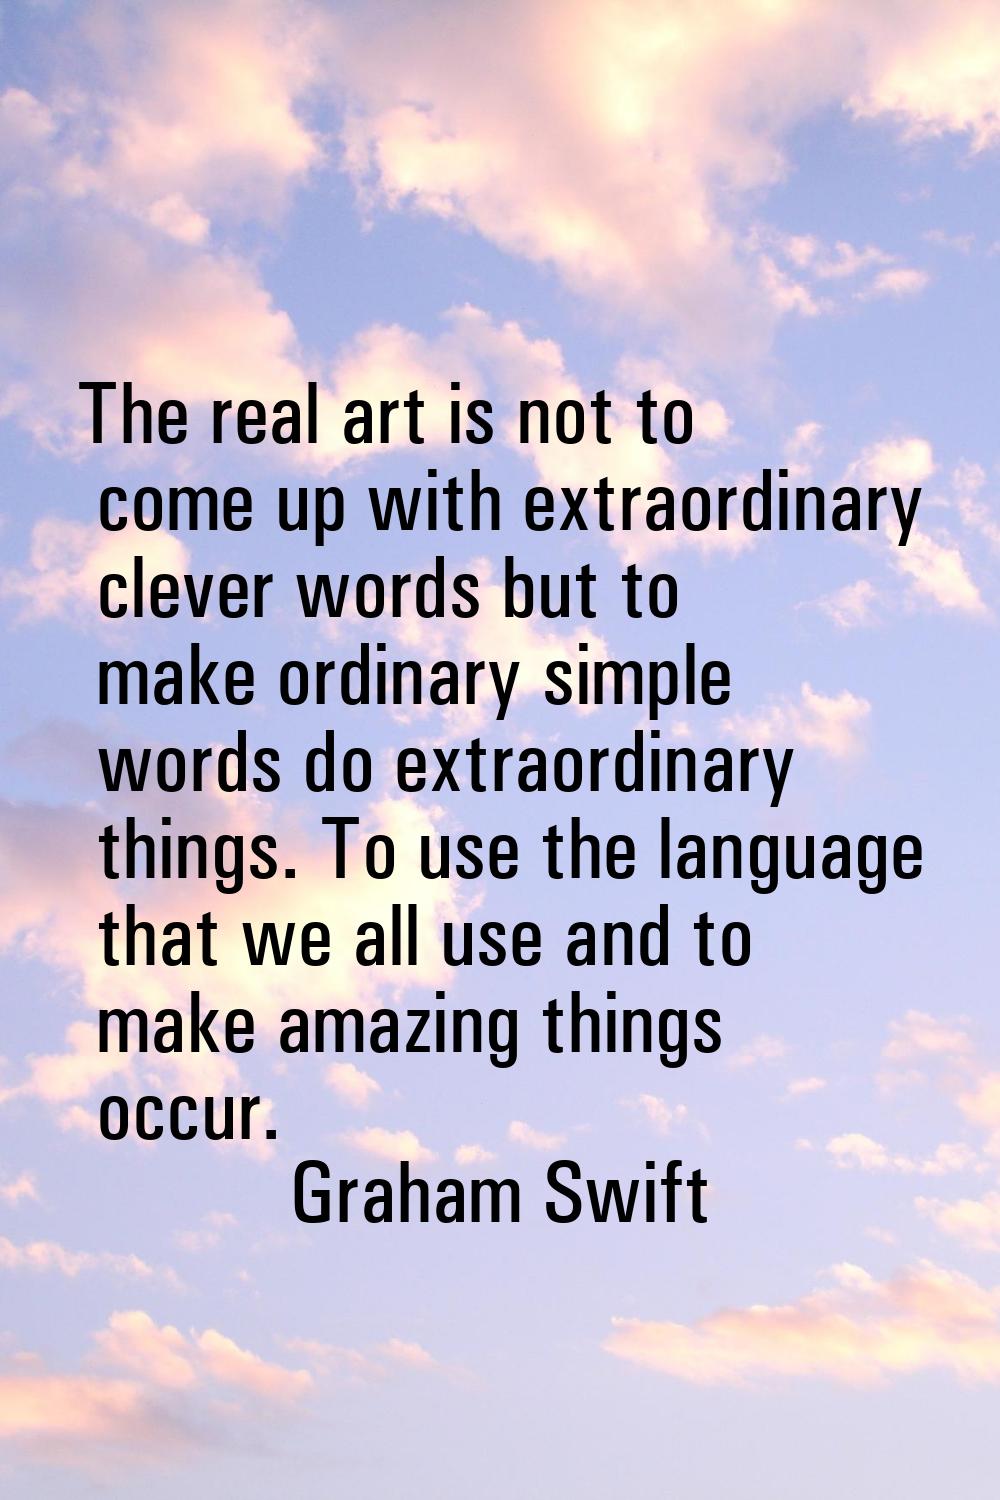 The real art is not to come up with extraordinary clever words but to make ordinary simple words do